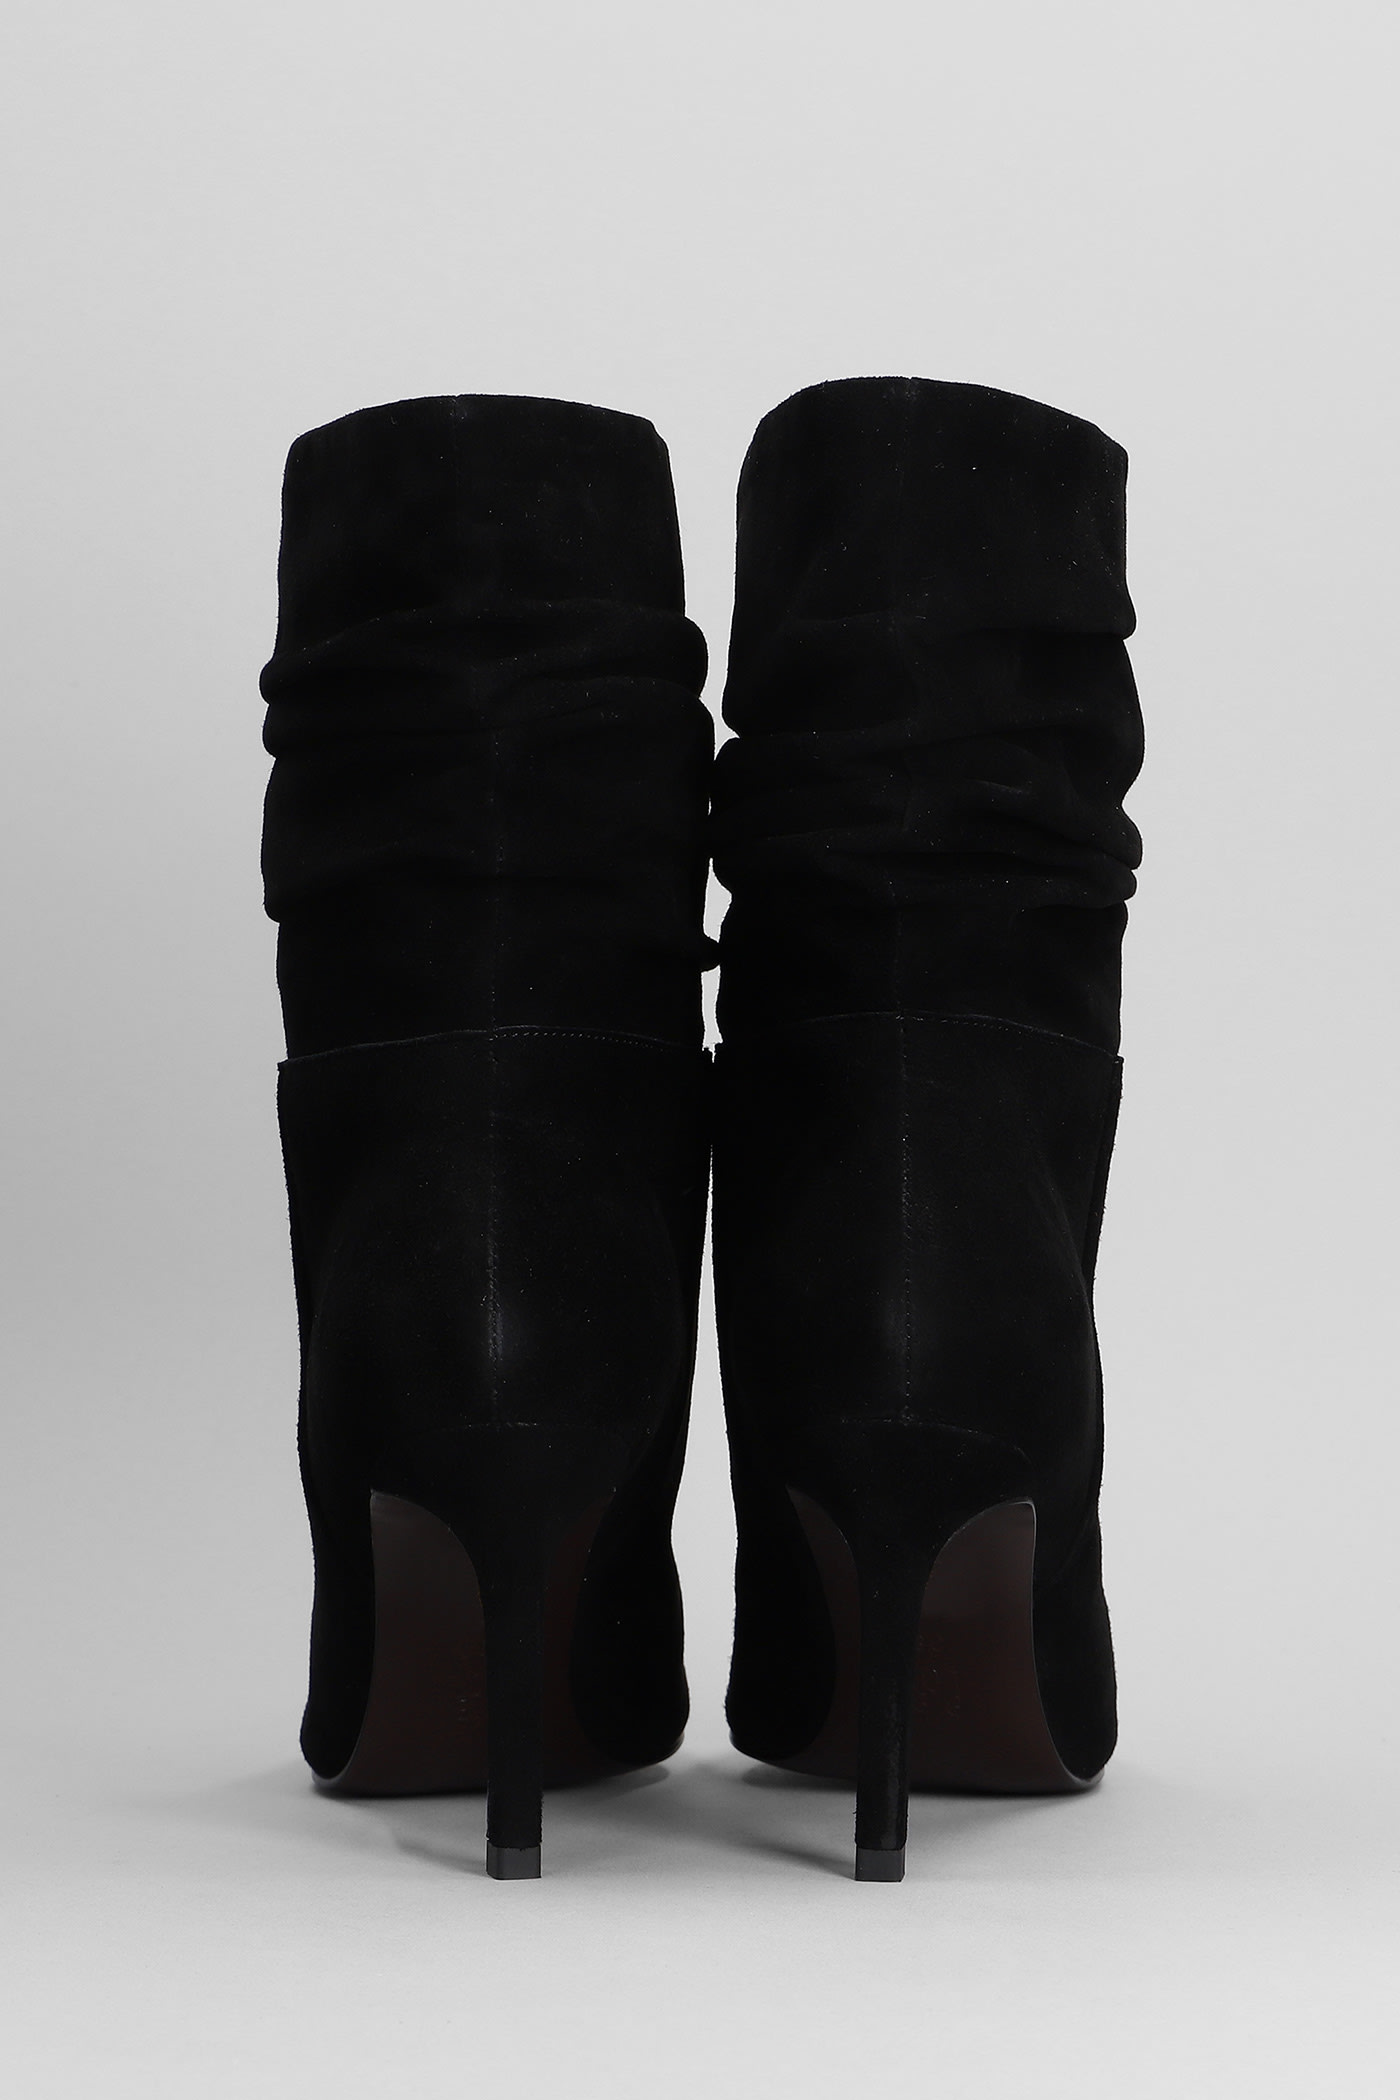 Shop Bibi Lou High Heels Ankle Boots In Black Suede